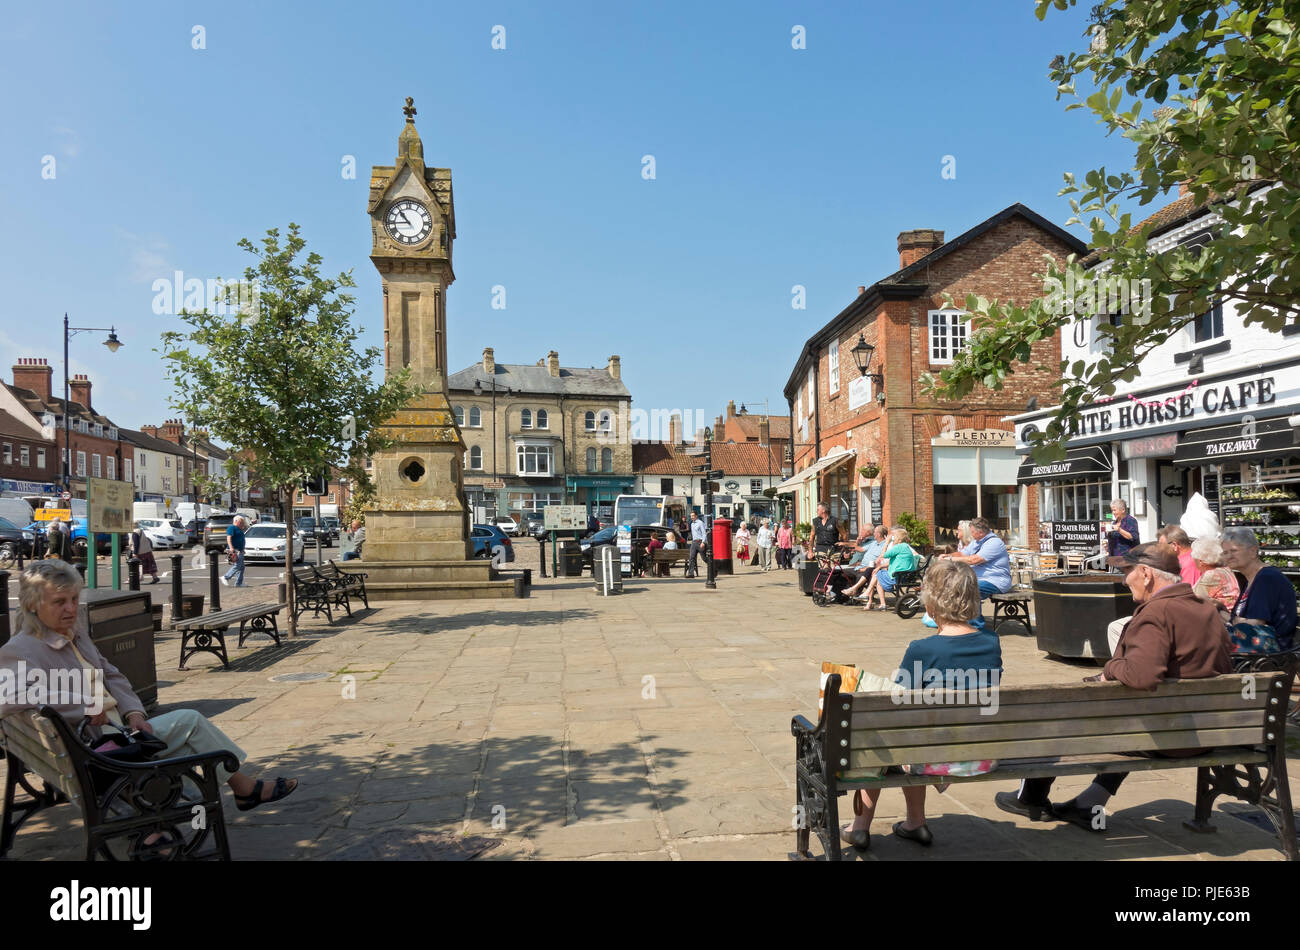 People shoppers relaxing sitting outside in the town centre in summer Market Place Thirsk North Yorkshire England UK United Kingdom GB Great Britain Stock Photo